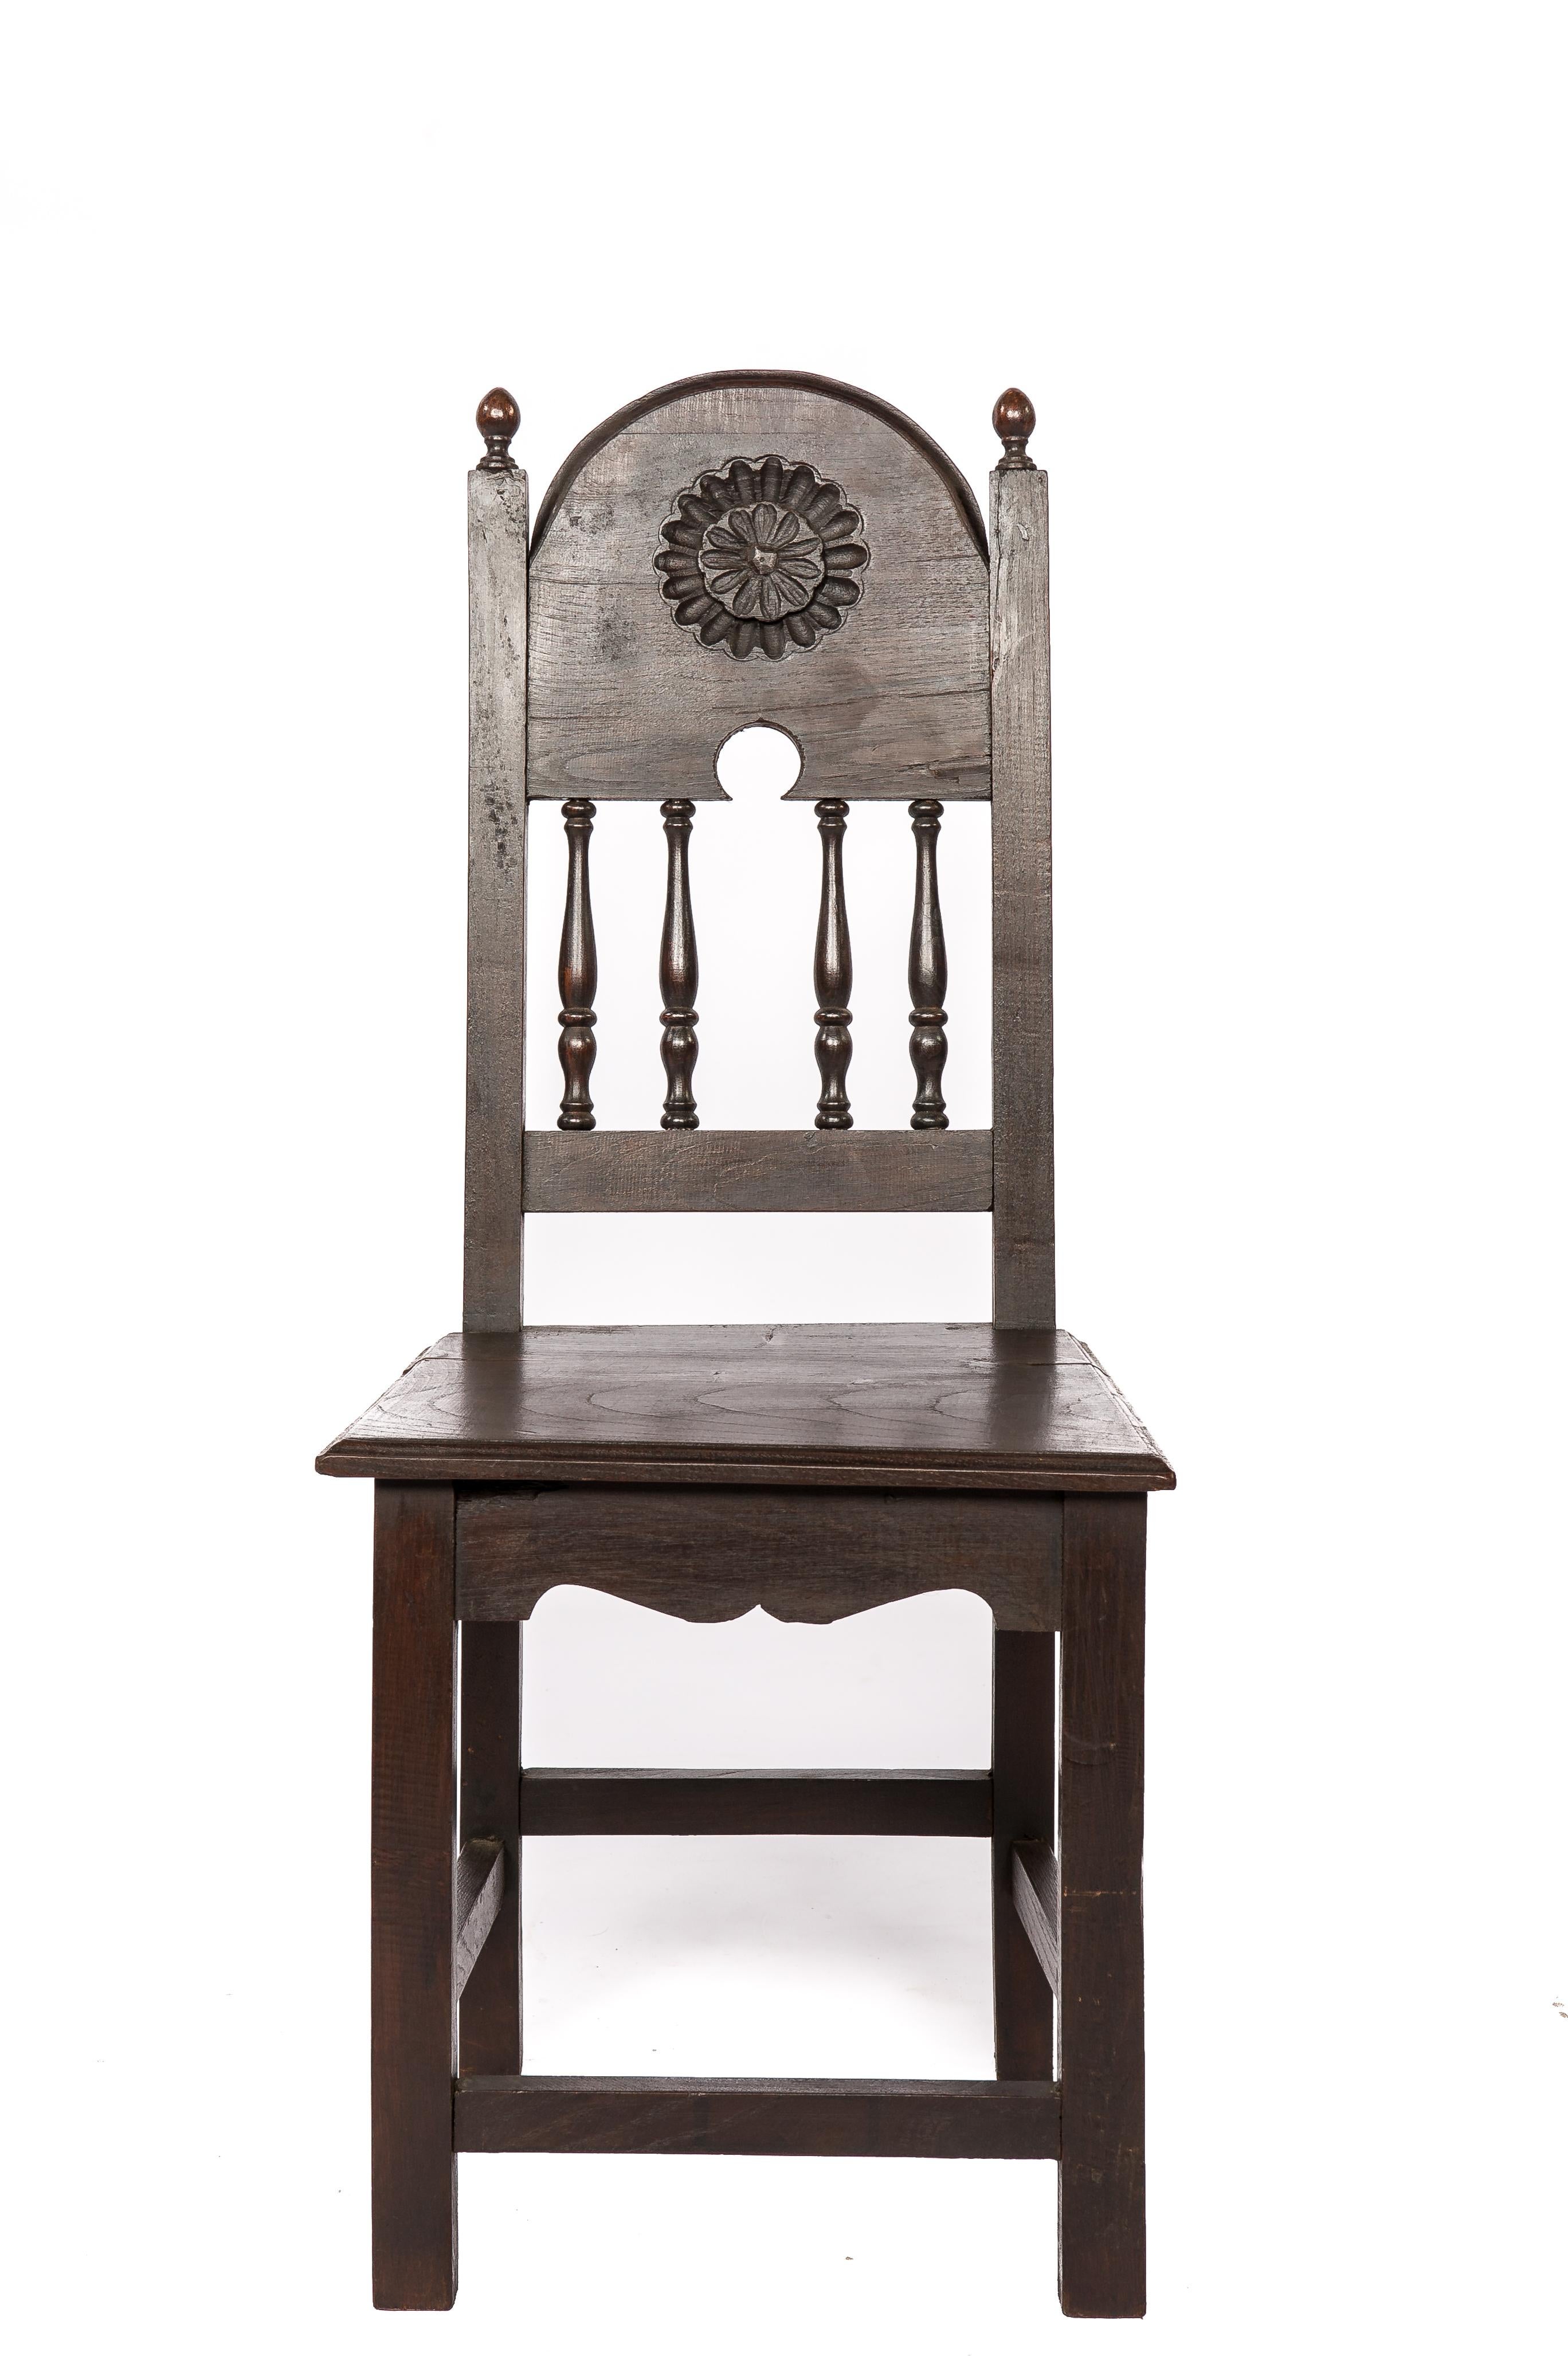 On offer here is a beautiful set of four identical chairs, crafted from solid chestnut wood in early 20th-century Spain. These chairs are a testament to Spanish craftsmanship and feature a timeless design that seamlessly blends elegance and